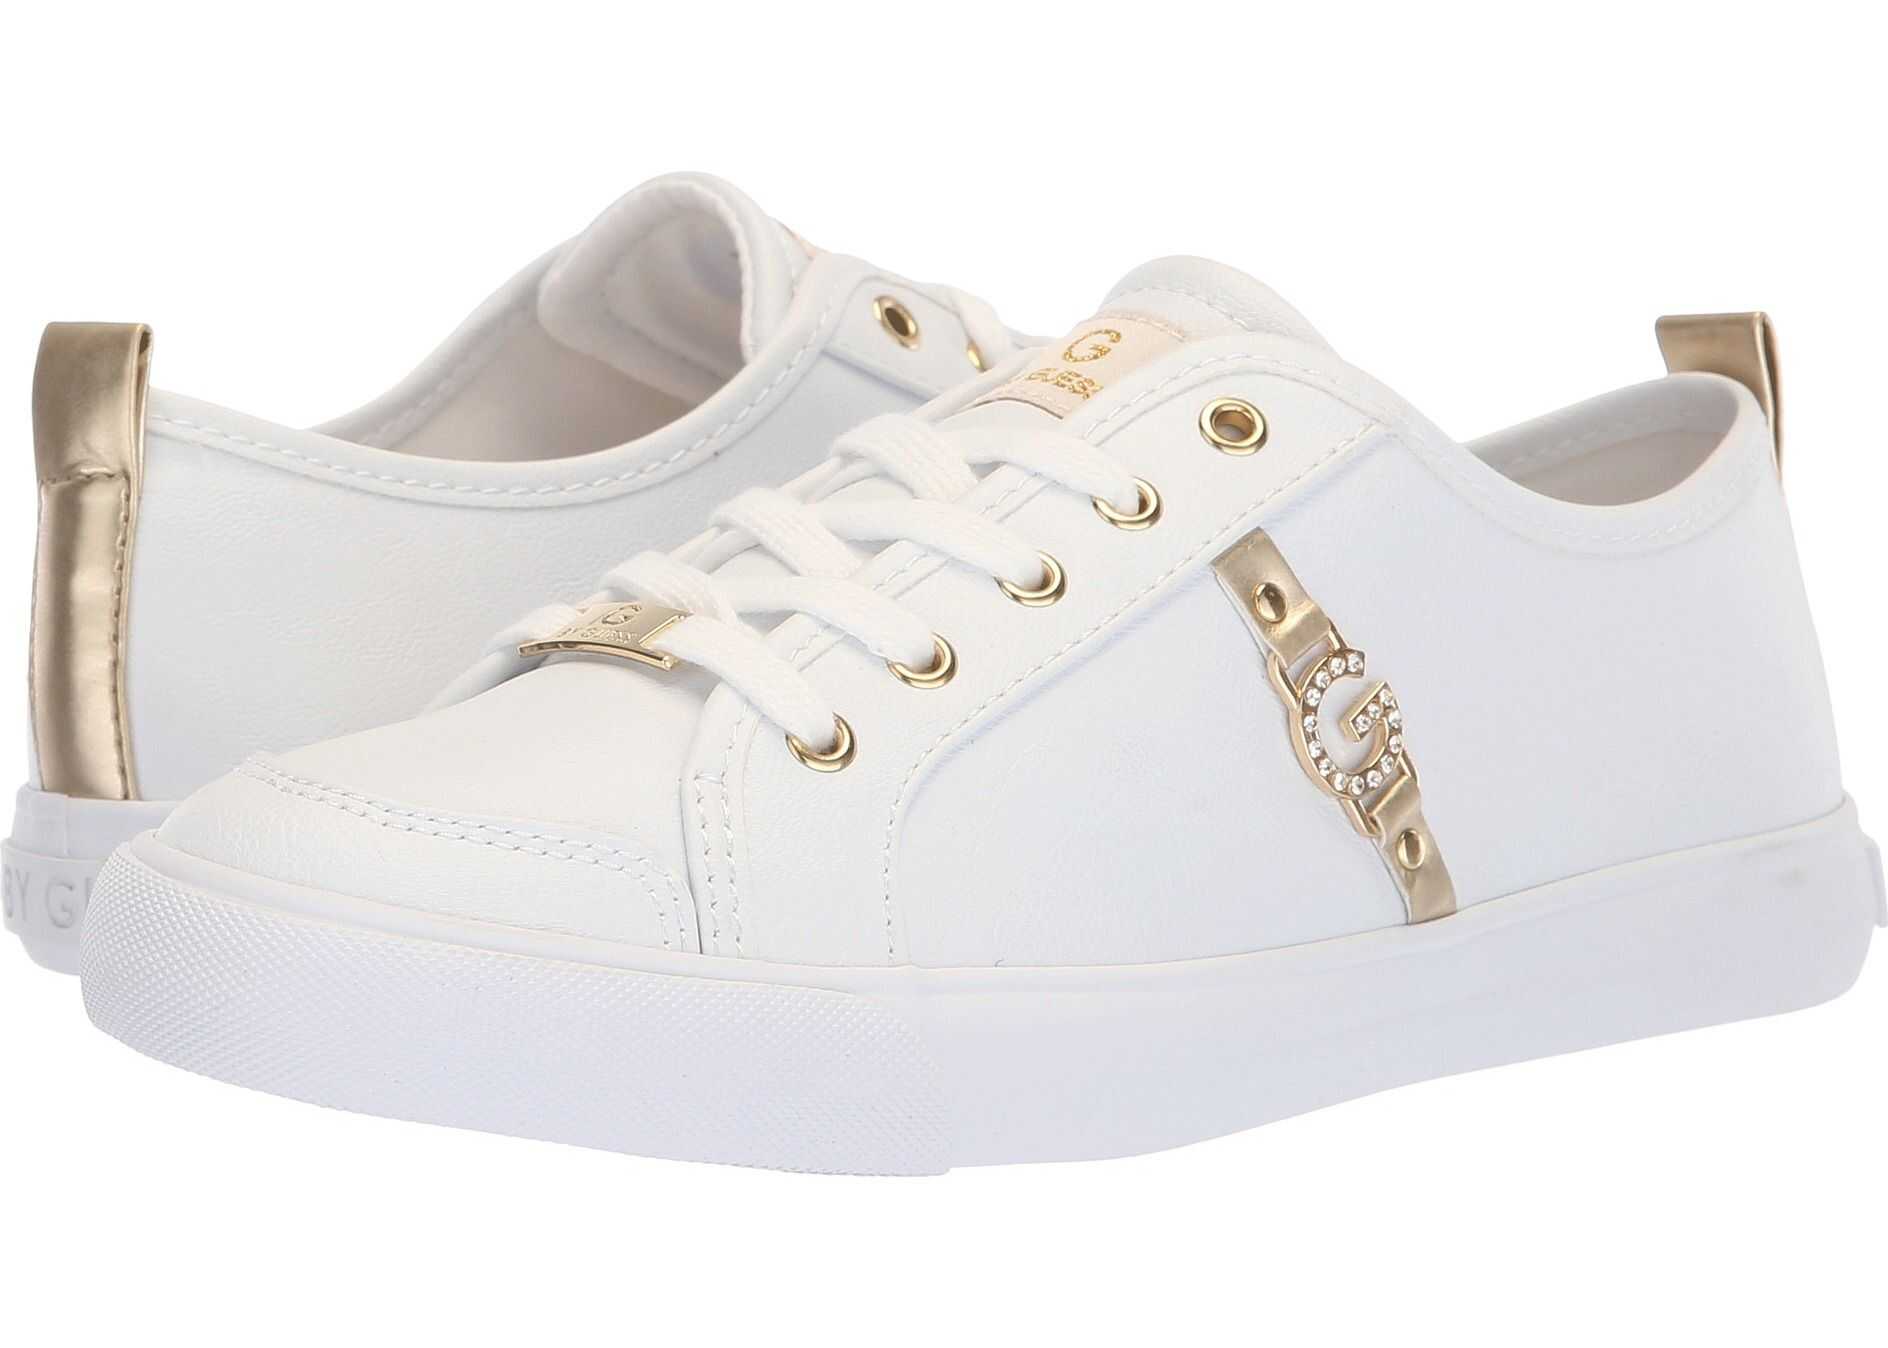 G by GUESS Banx2 White/Gold/Gold